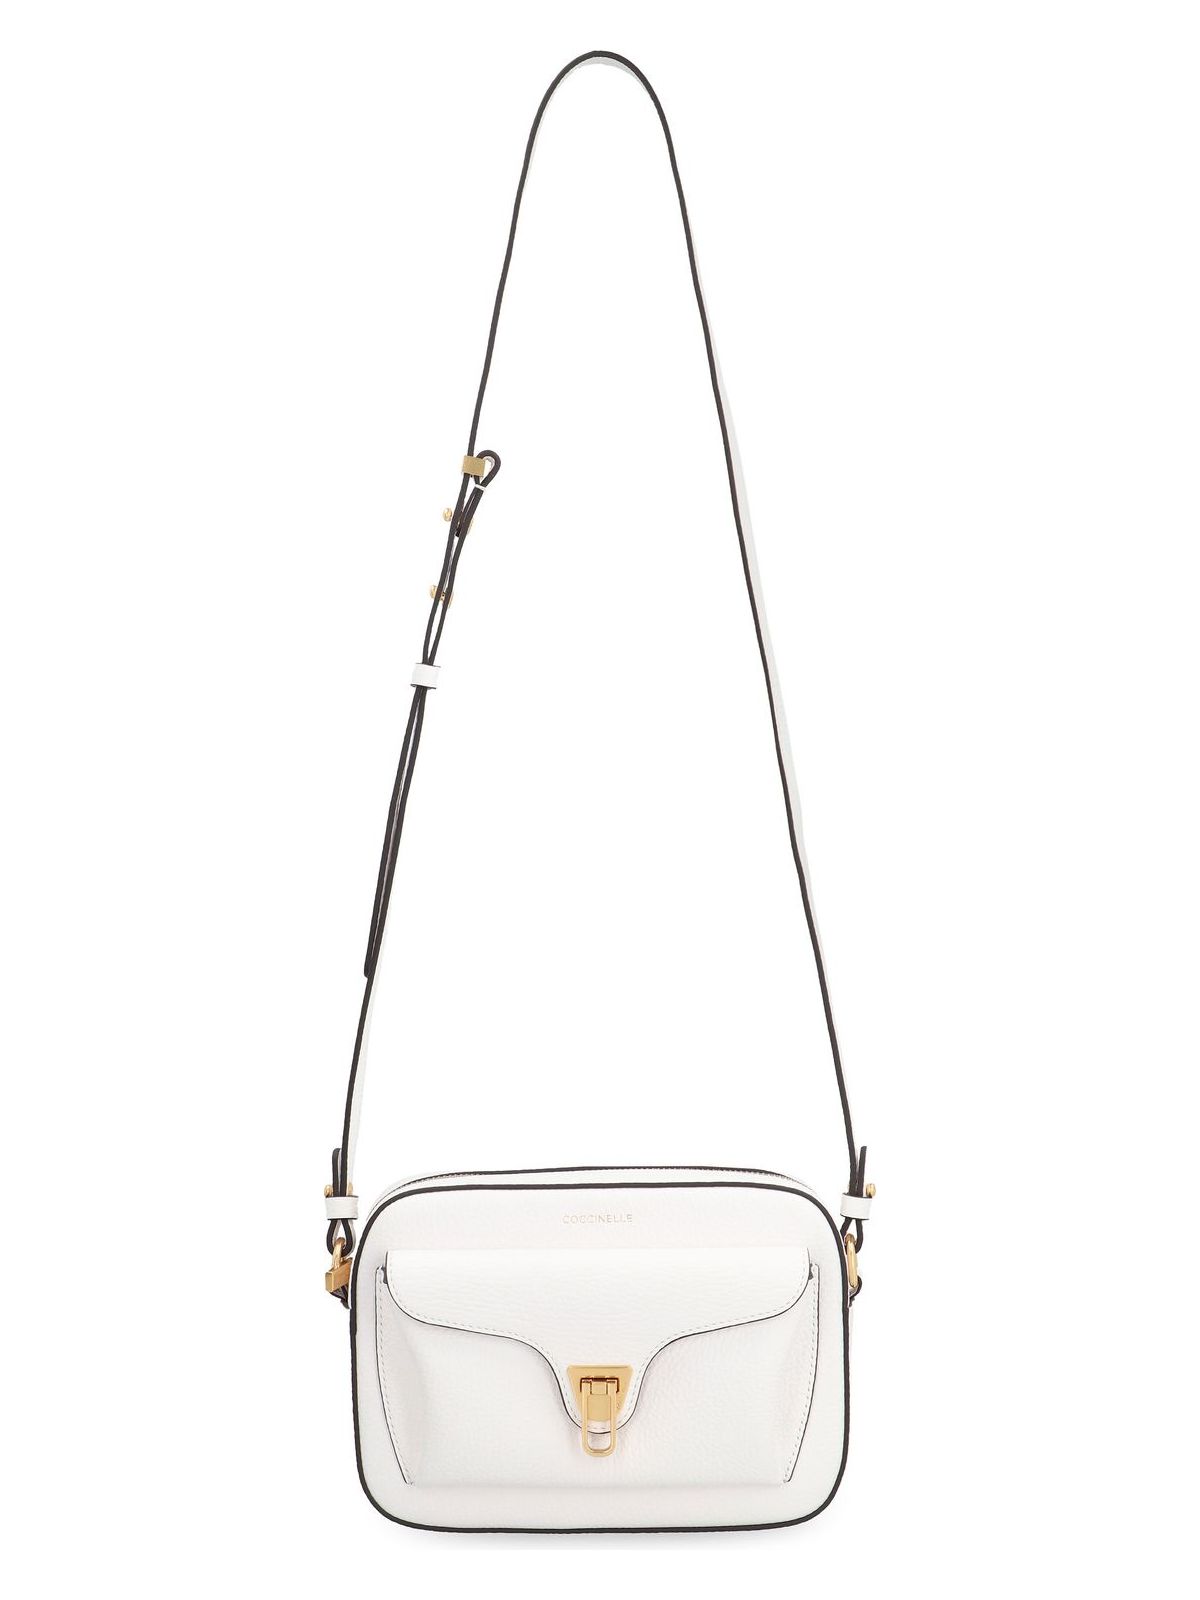 H13 COCCINELLE BEAT SOFT LEATHER CROSSBODY BAG